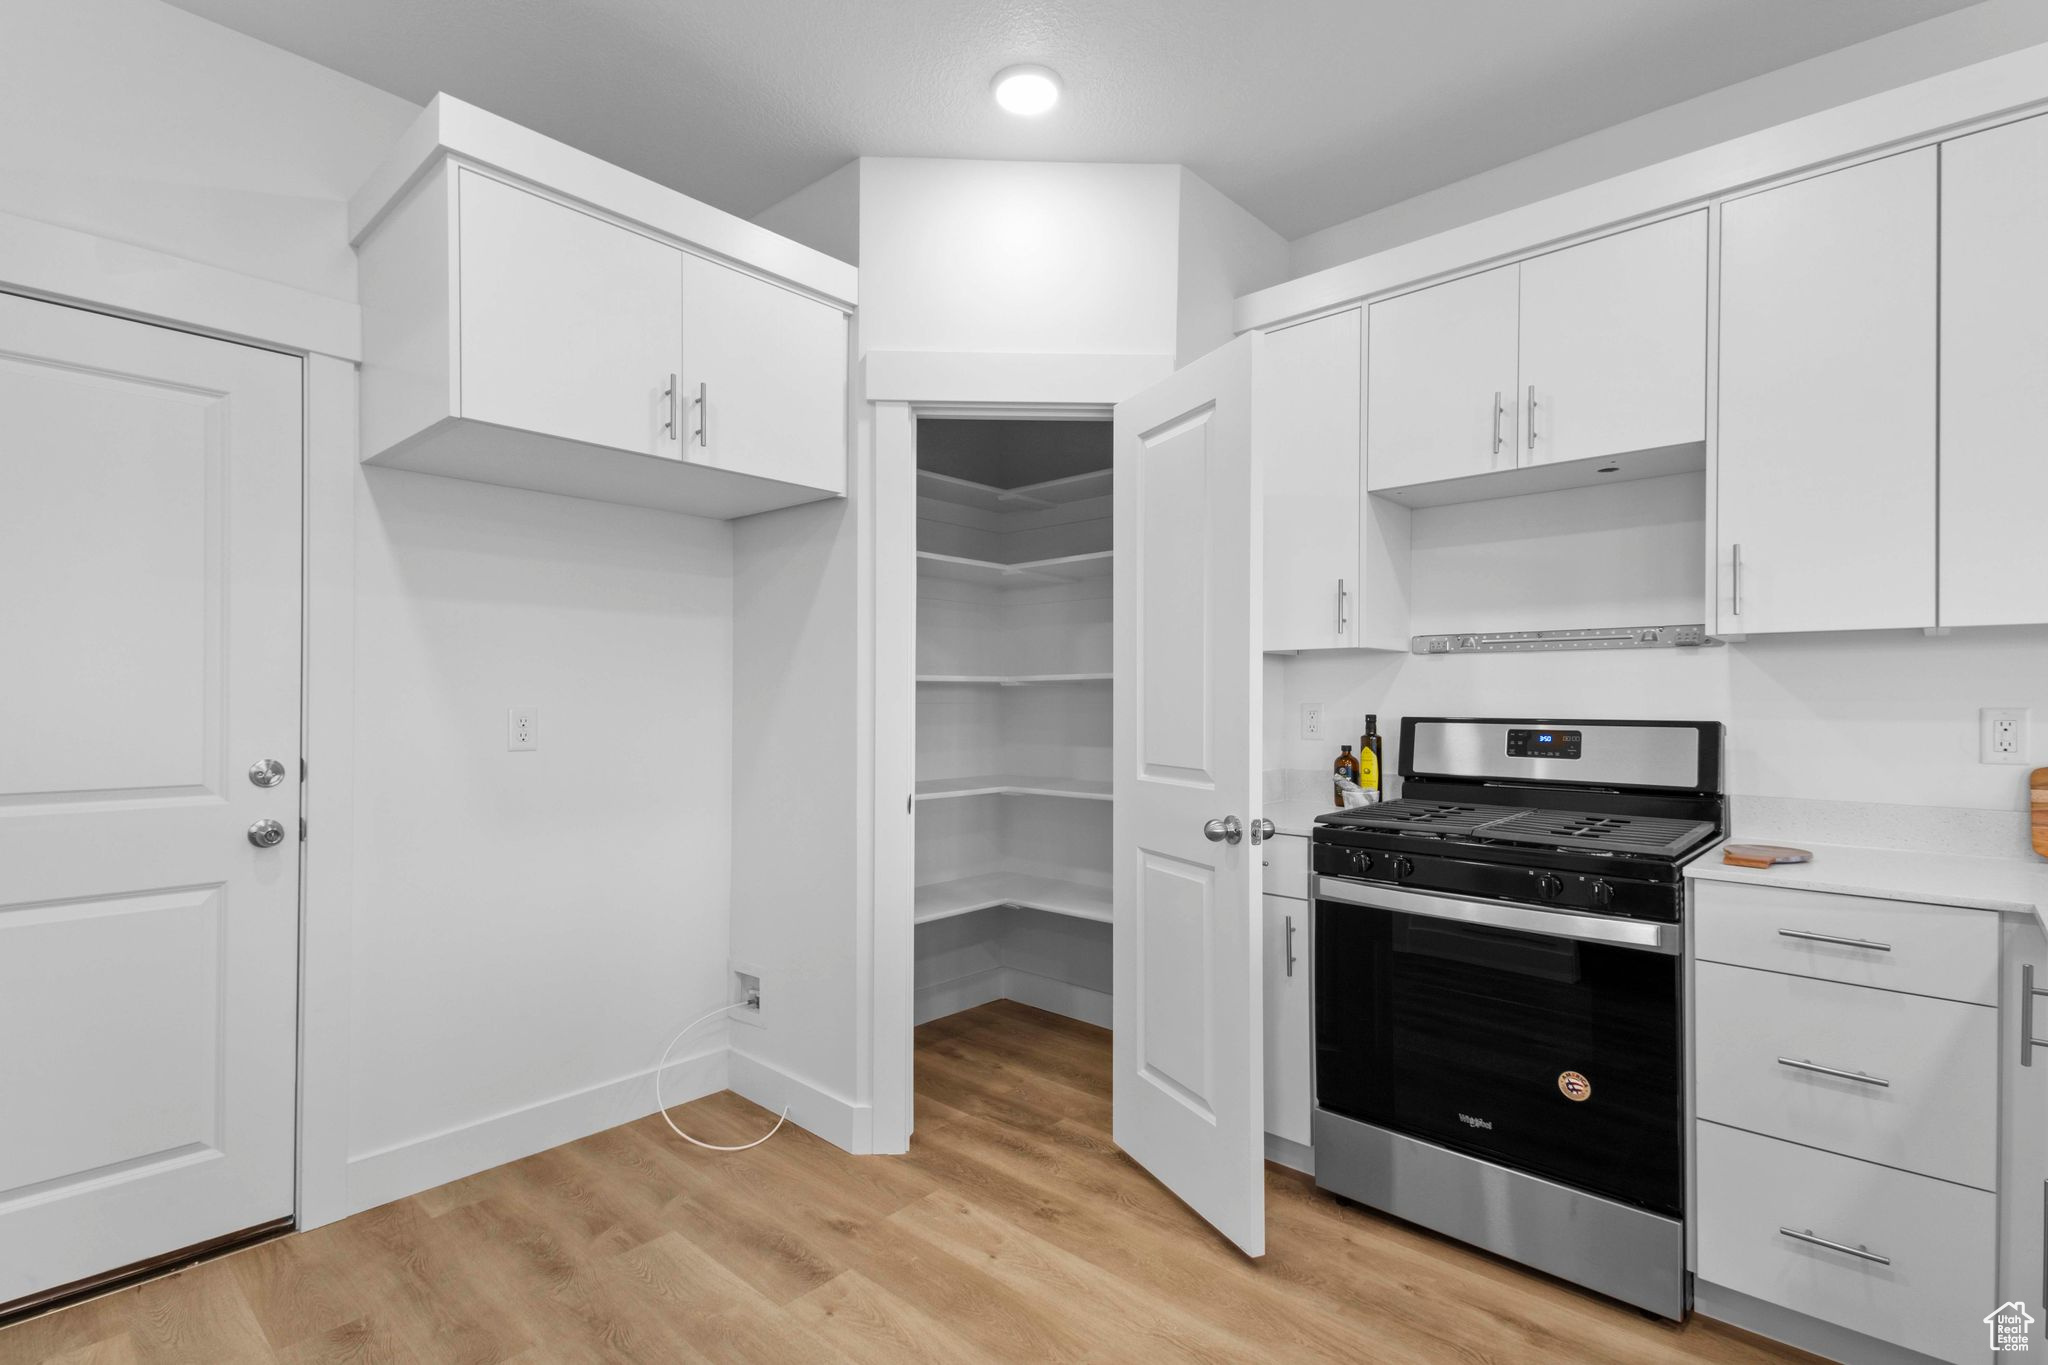 Kitchen featuring light hardwood / wood-style flooring, white cabinetry, and stainless steel gas range oven